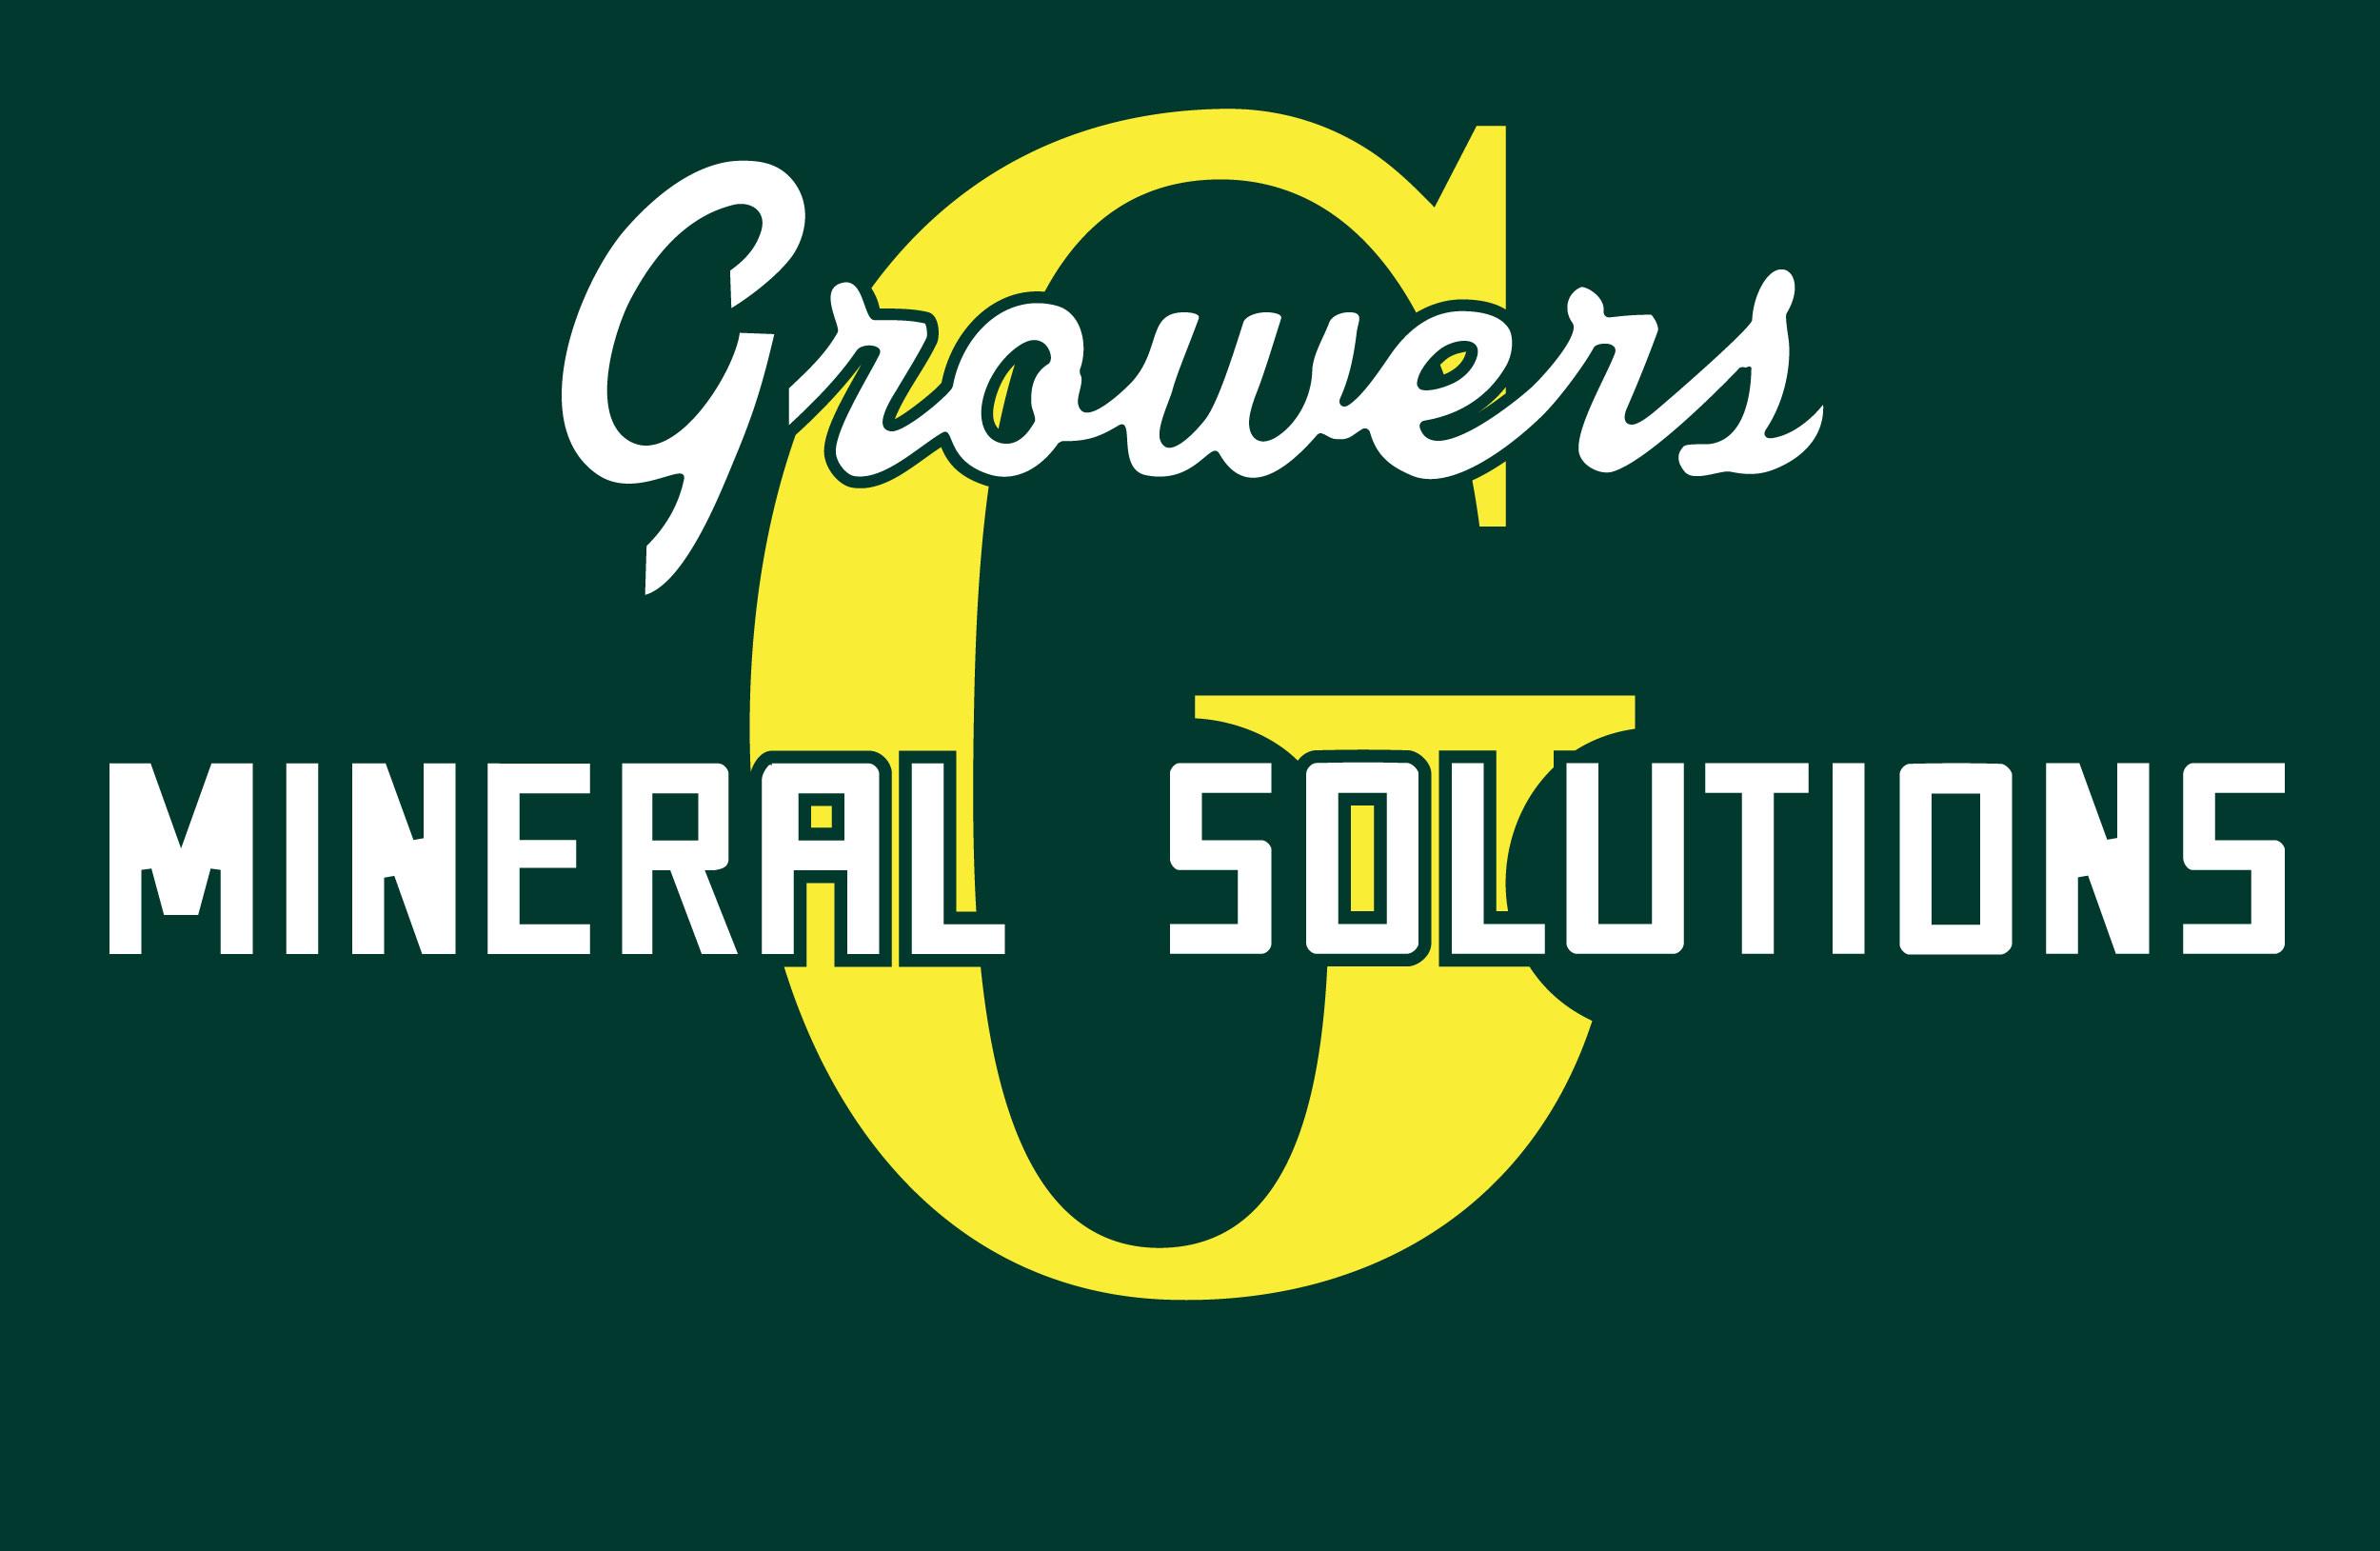 Growers Mineral Solutions logo